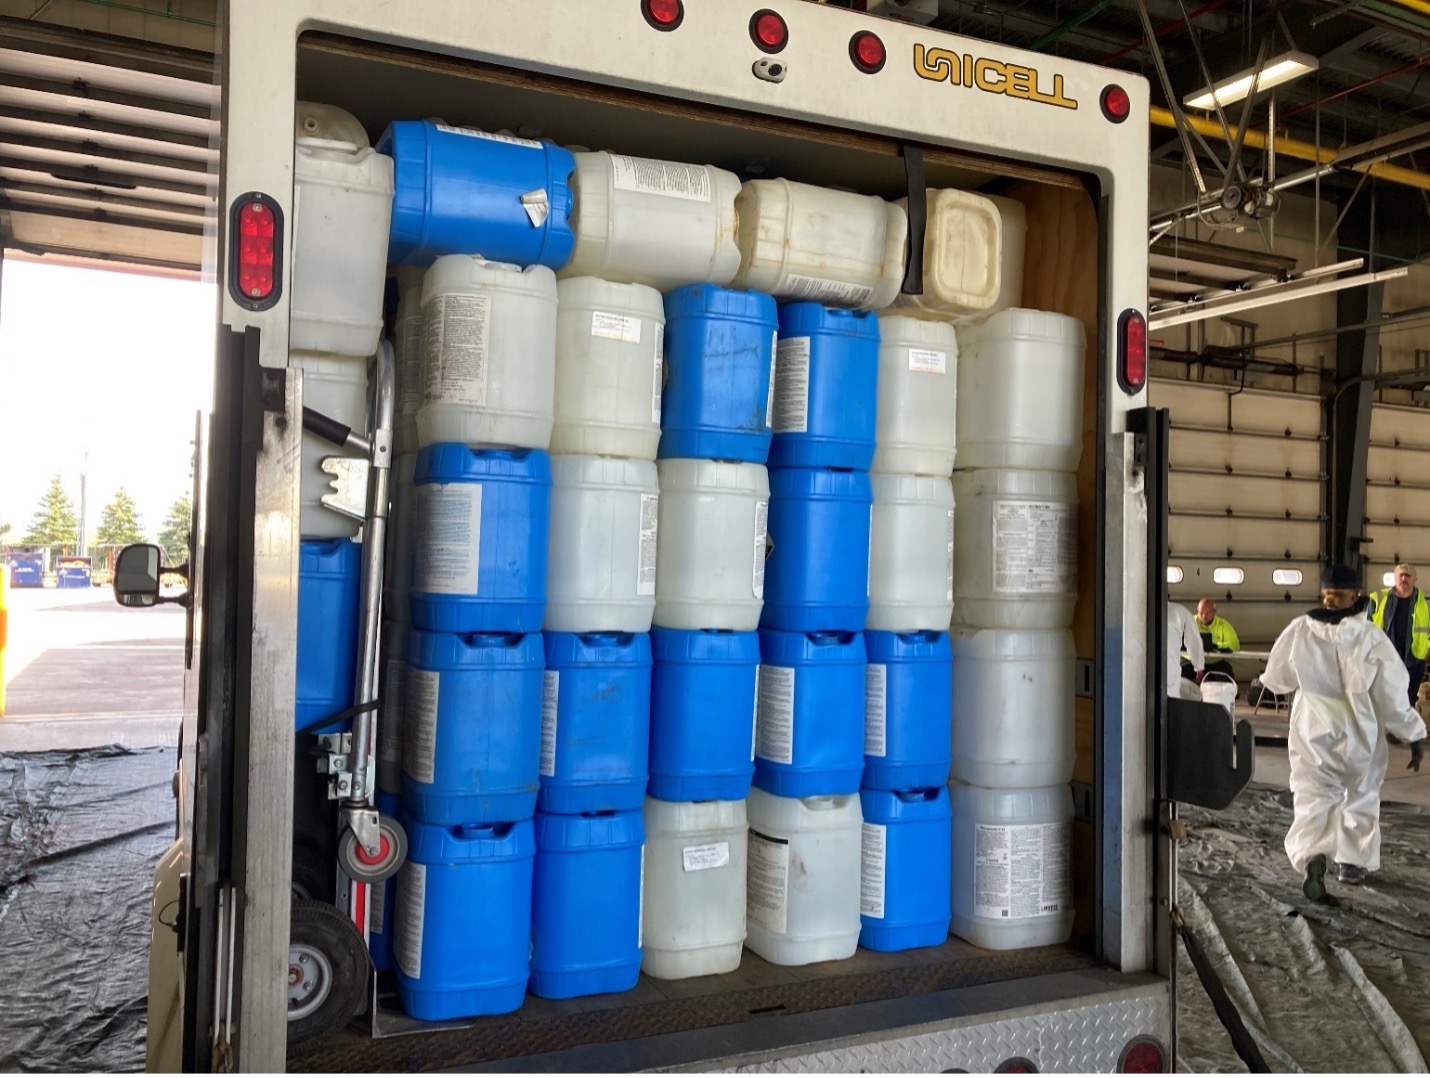 Large quantity of triple-rinsed biocide containers for recycling.